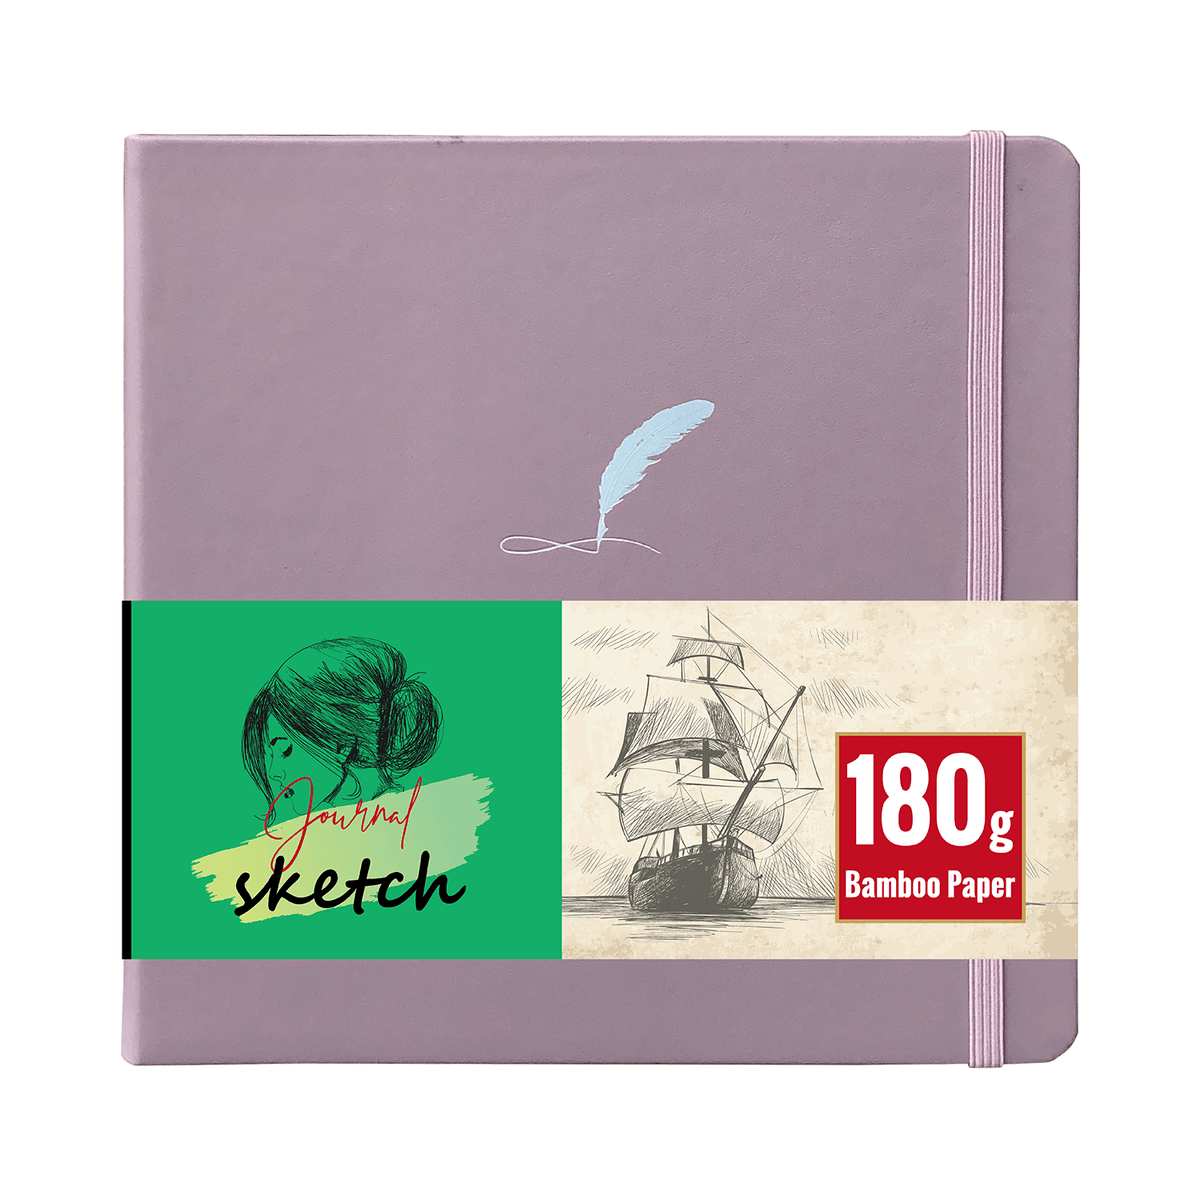 8X8 Square Hardcover SKetchbook Journal 180GSM Bamboo PAPER 128 Pages - White - bukenotebook